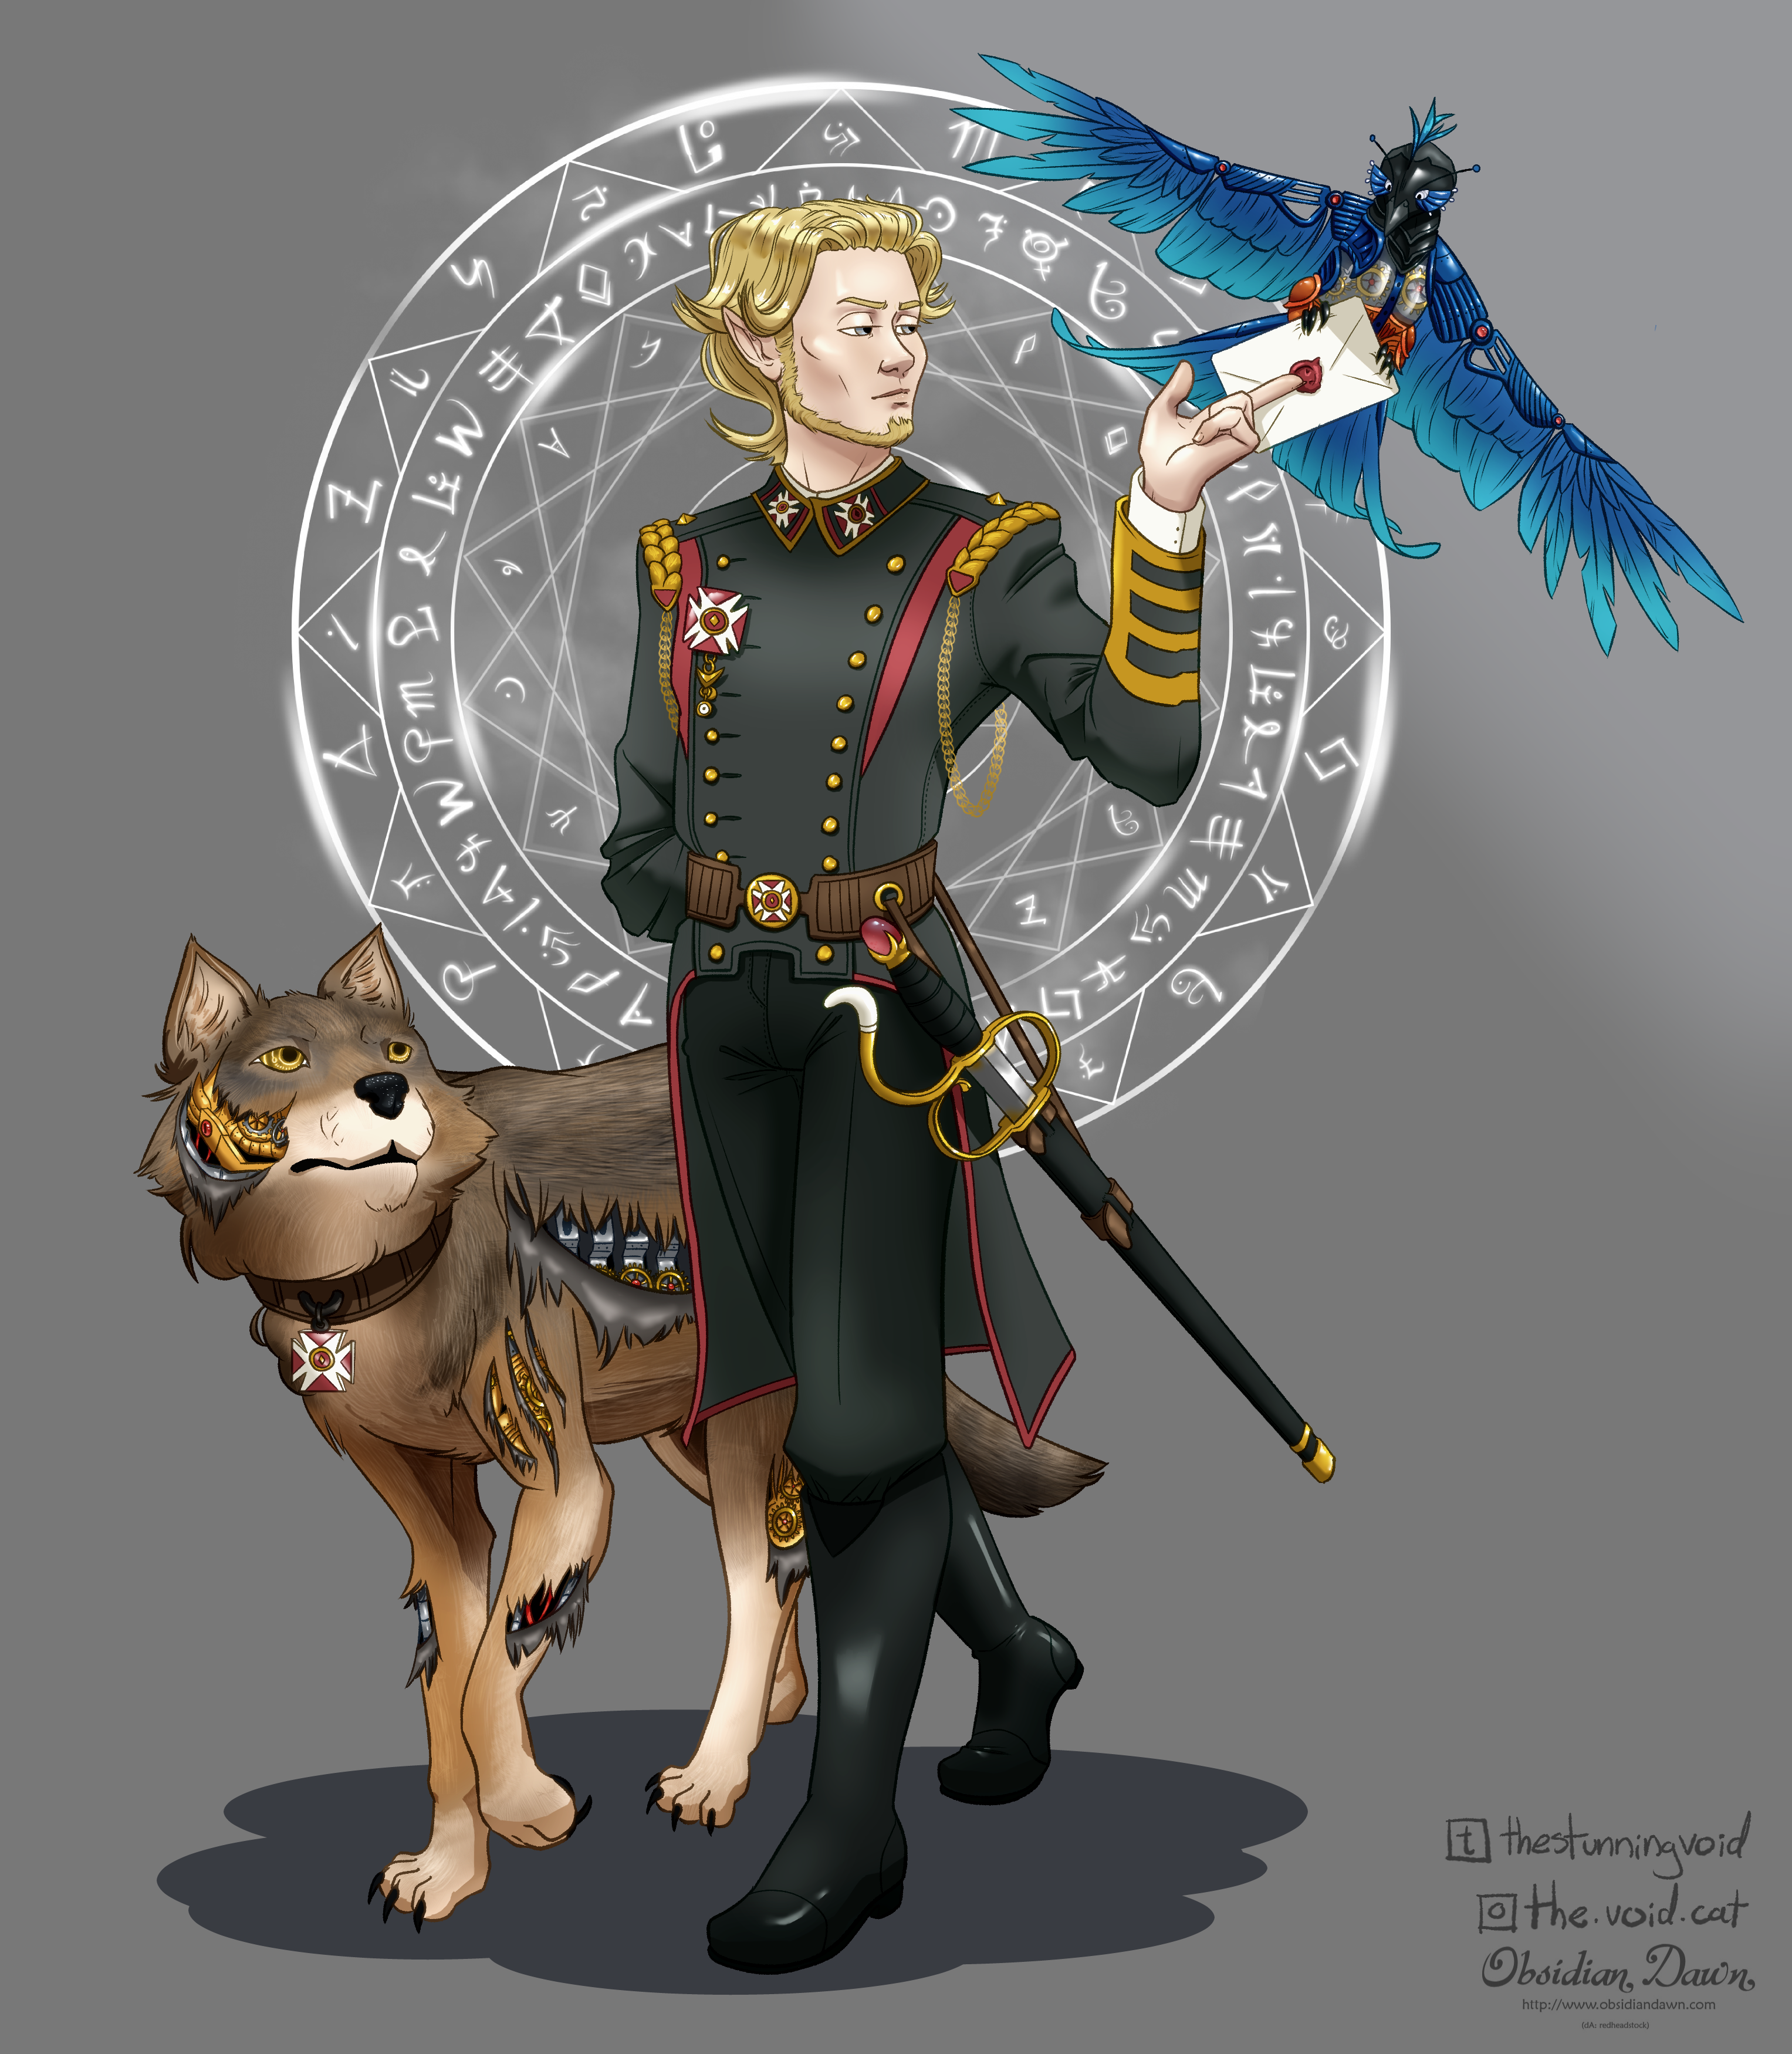 A drawing of Walter, a half-elf with pale skin, gray eyes, short blond hair, and a small beard. He's wearing a gray military uniform with gold and red accents, and there's a rapier at his side in a black leather scabbard. He's walking side-by-side with a mechanical wolf companion. The wolf's fur is torn in places, revealing the machinery underneath. Both Walter and his wolf are looking at a bright blue mechanical bird that Walter is handing a sealed letter to. There is a white arcane circle decoration behind them.